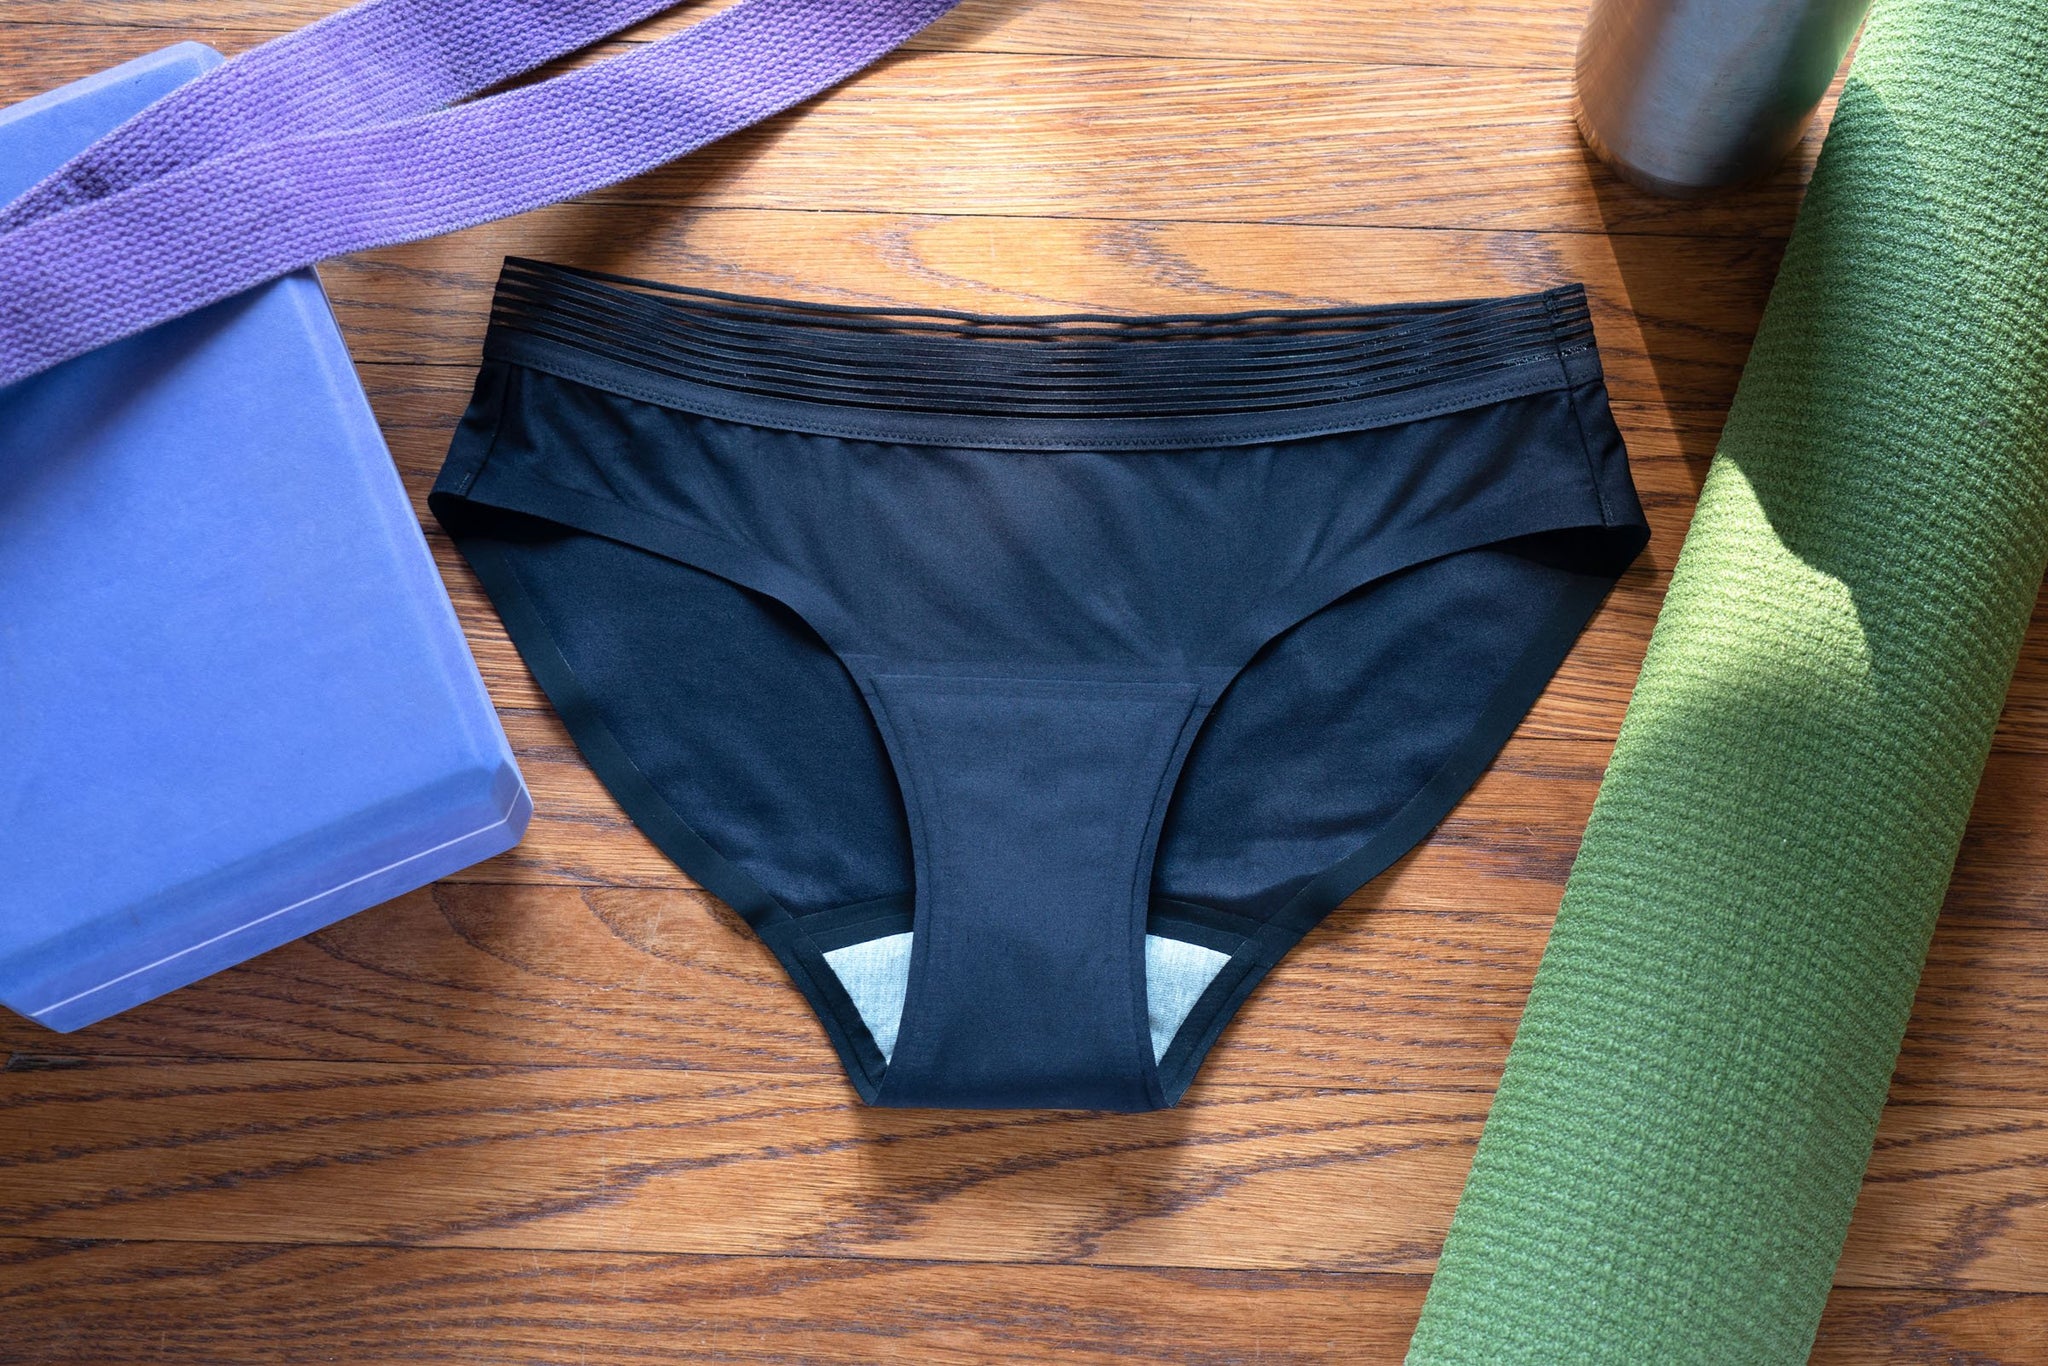 Leakproof Underwear For Women Incontinence,leak Proof Protective